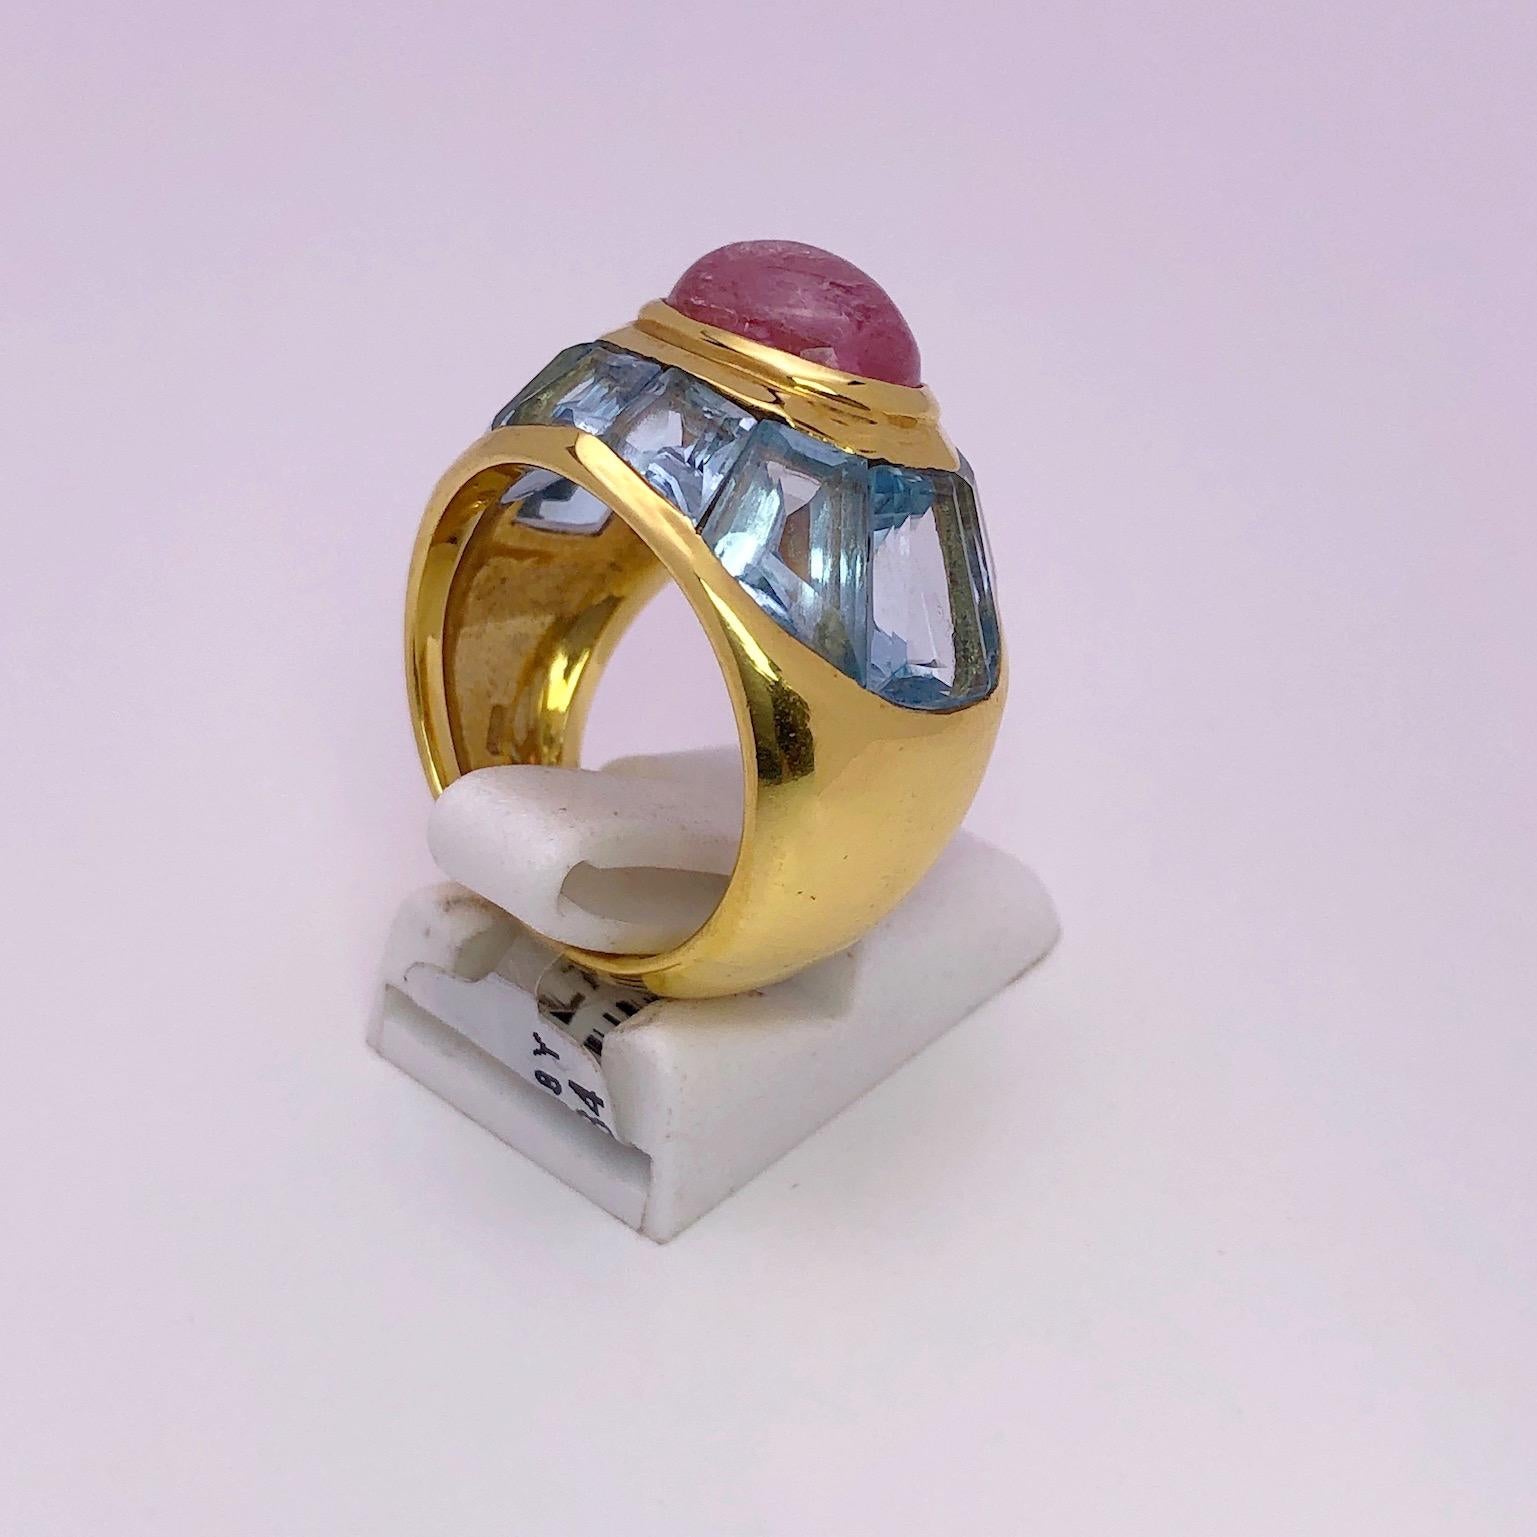 Contemporary Roberto Legnazzi 18 Karat Yellow Gold Ring with Pink Tourmaline and Blue Topaz For Sale